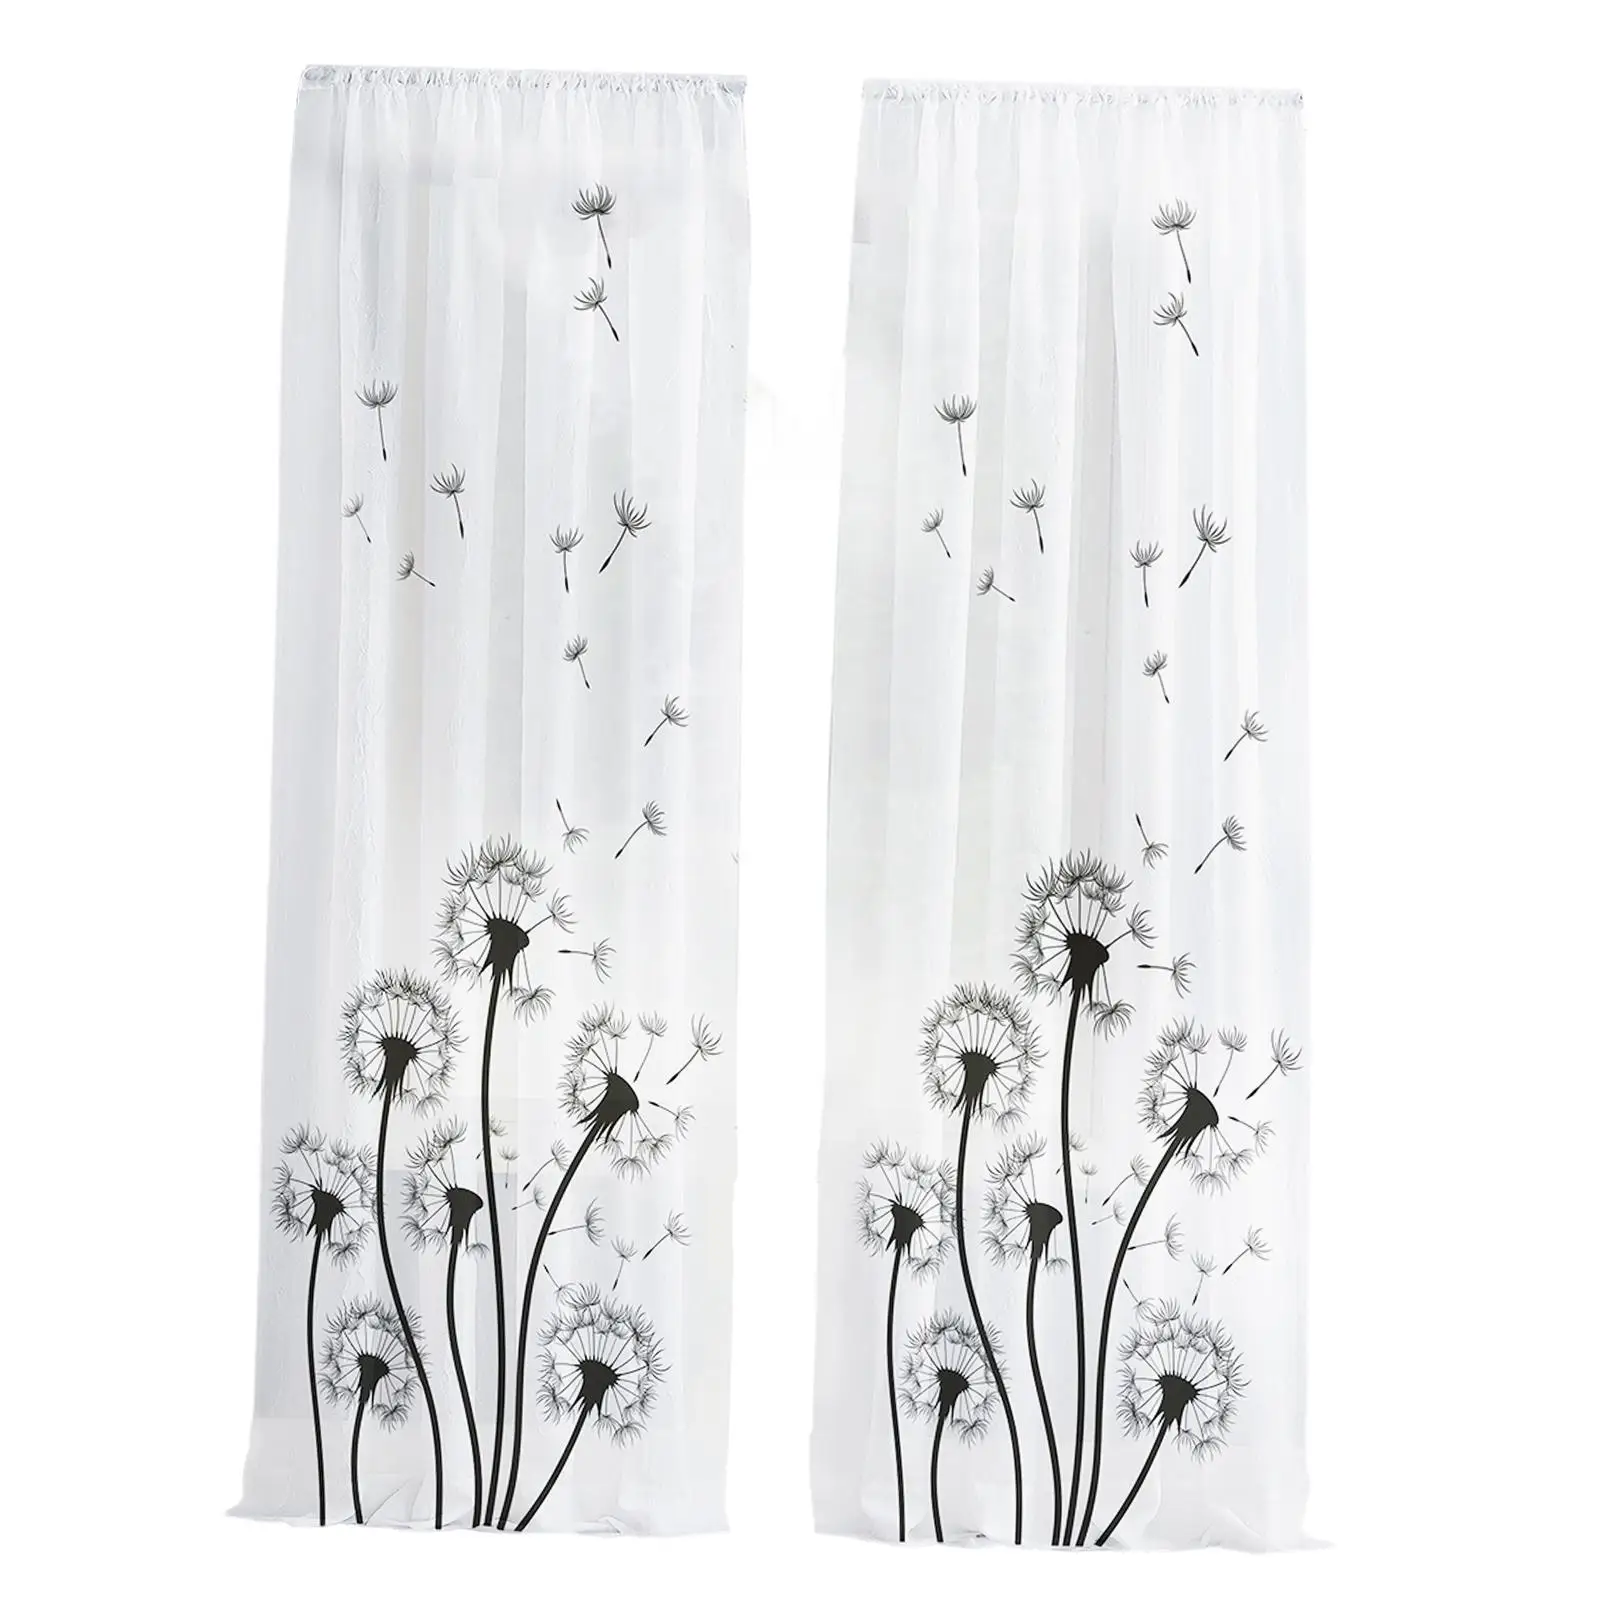 2x Window Tulle Curtains Filtering Window Curtains Decoration Rod Pocket Curtain for Home Window Sliding Glass Door Kitchen